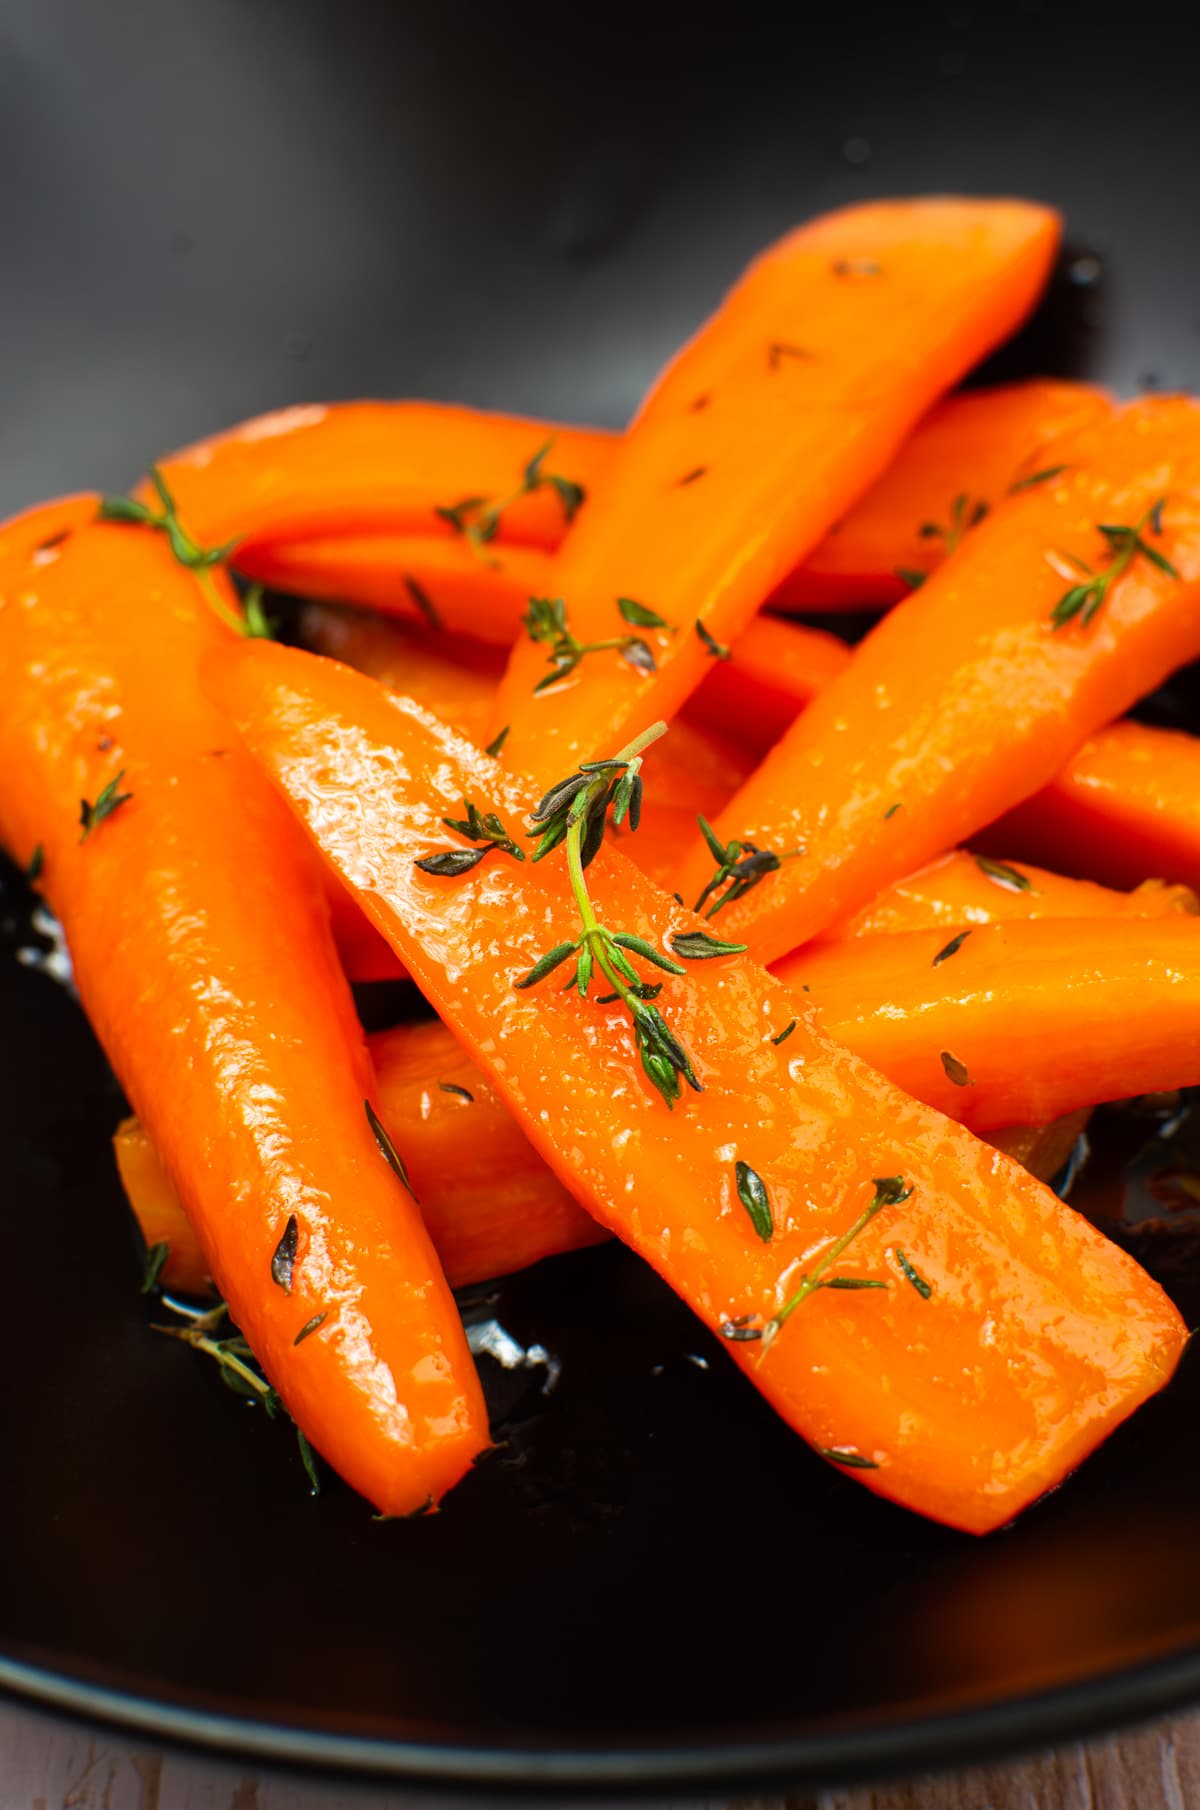 Glazed carrots with thyme in a black plate.